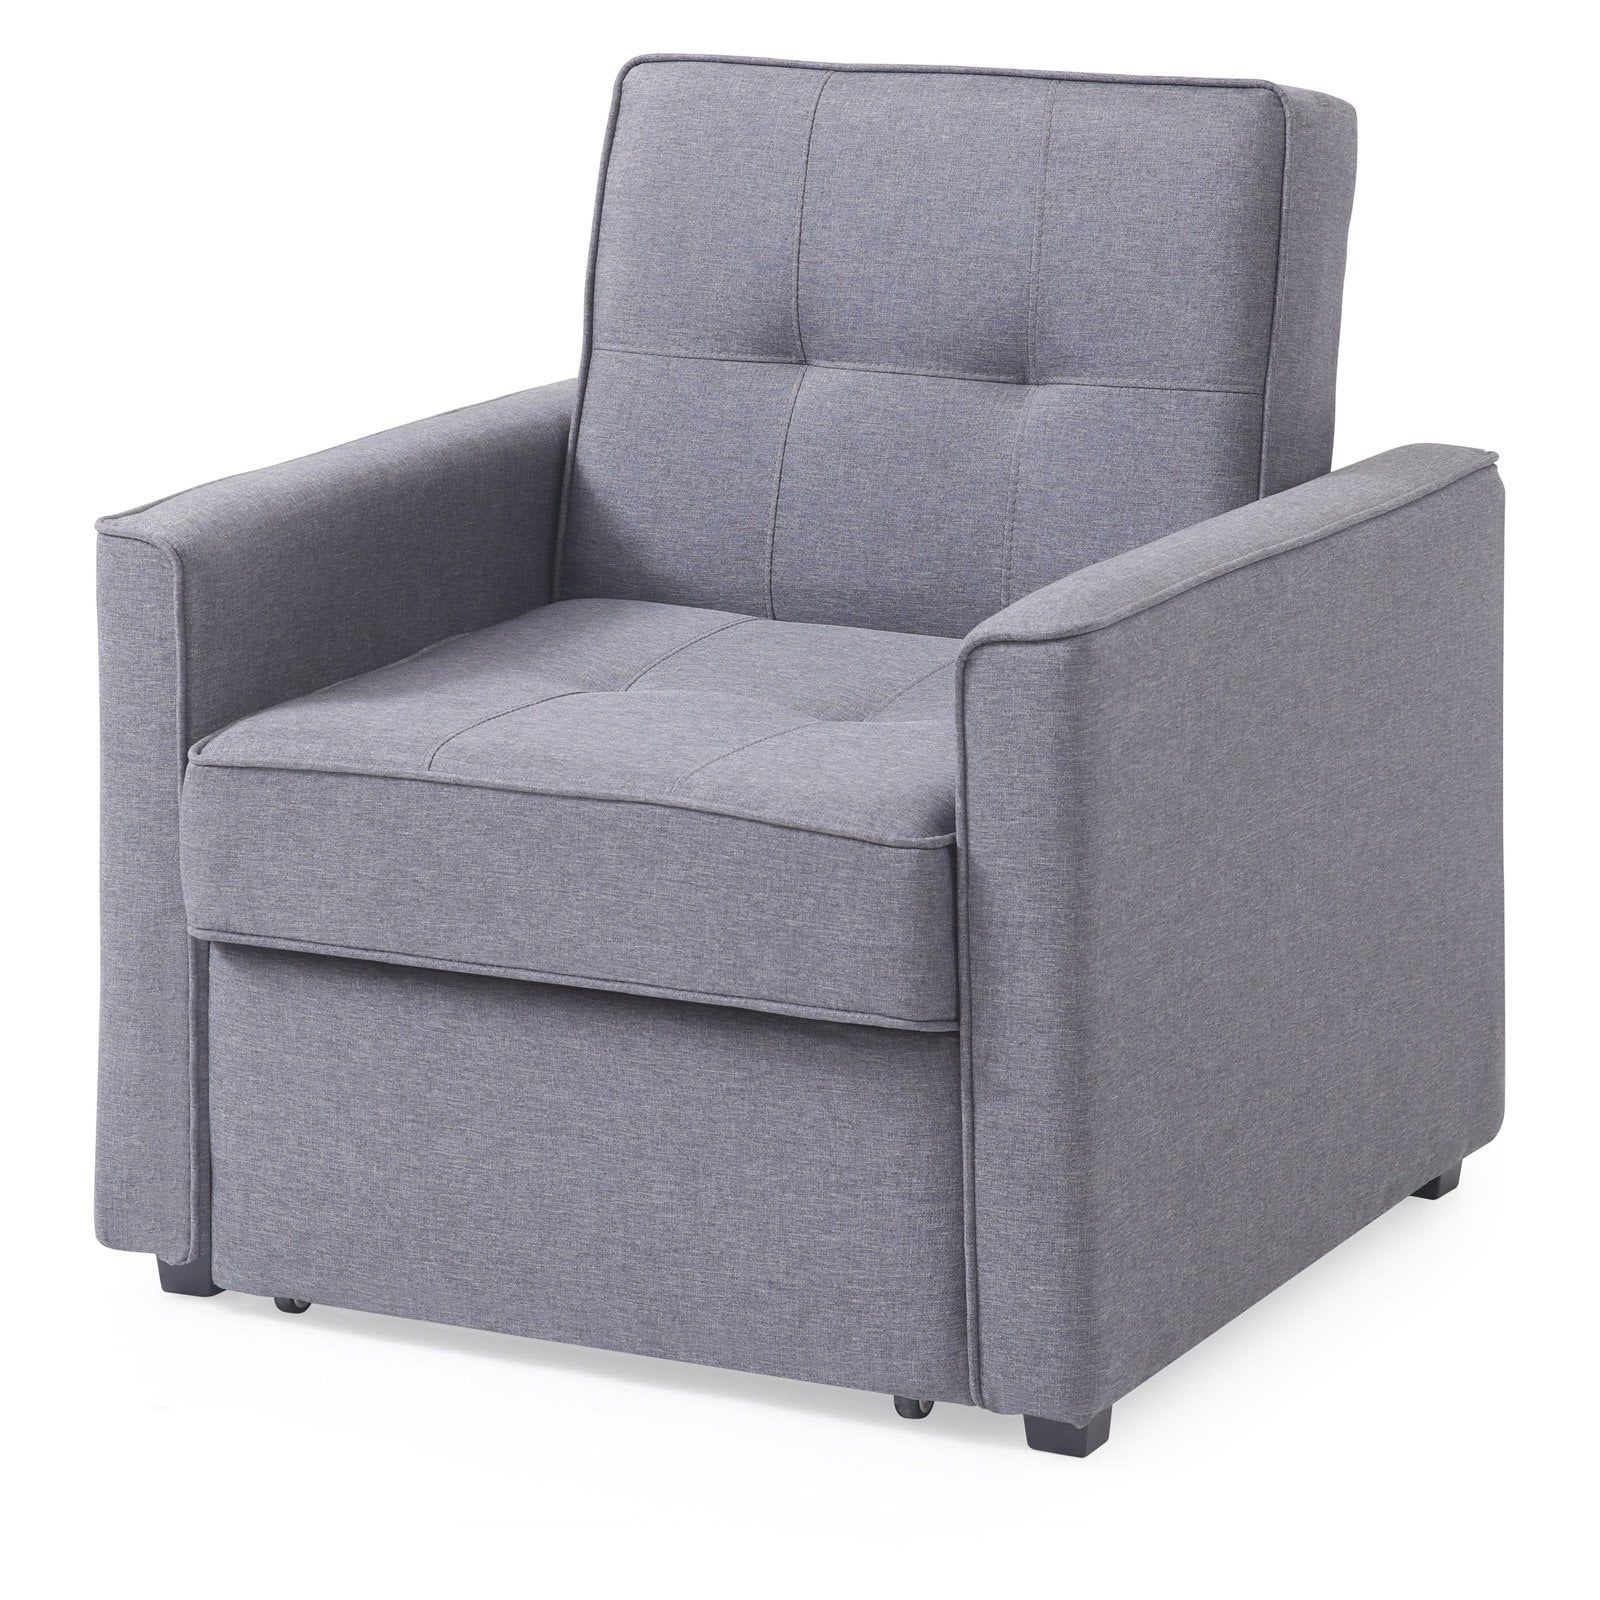 Gold Sparrow Chandler Gray Convertible Arm Chair Bed – Walmart For Convertible Light Gray Chair Beds (View 4 of 20)